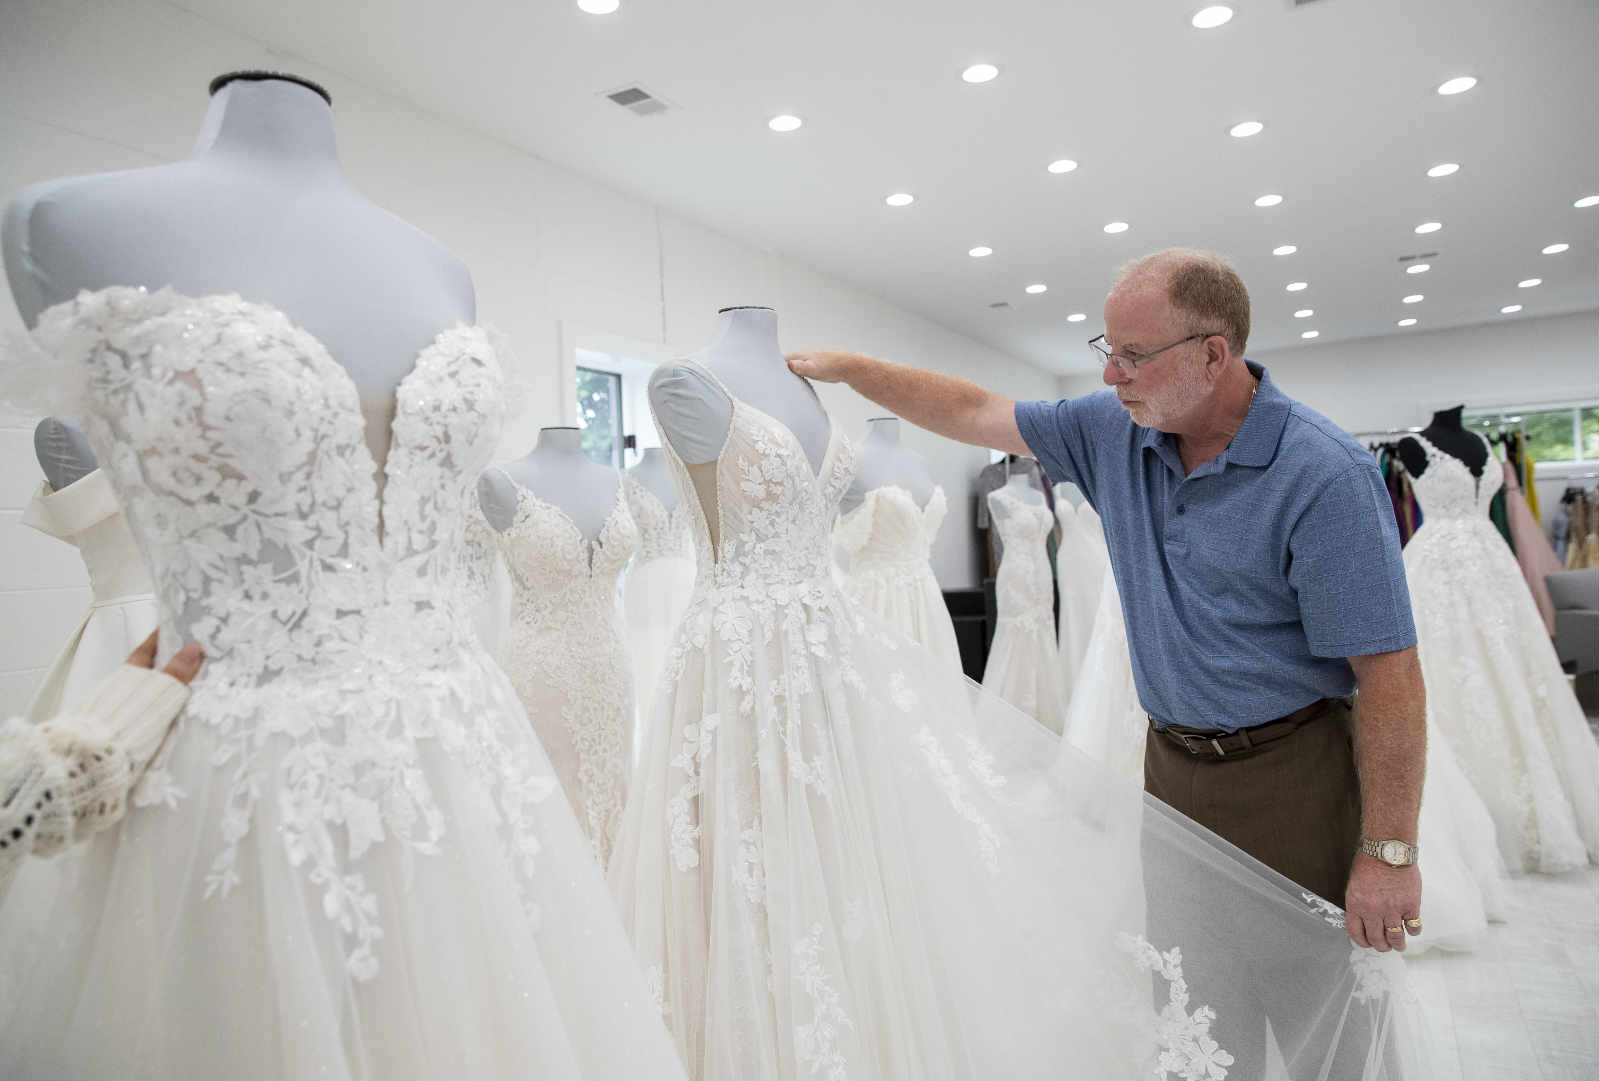 Steve Lang, president of the American Bridal and Prom Industry Association, who is also CEO of U.S. brand Mon Cheri, looks at a bridal dress at his company